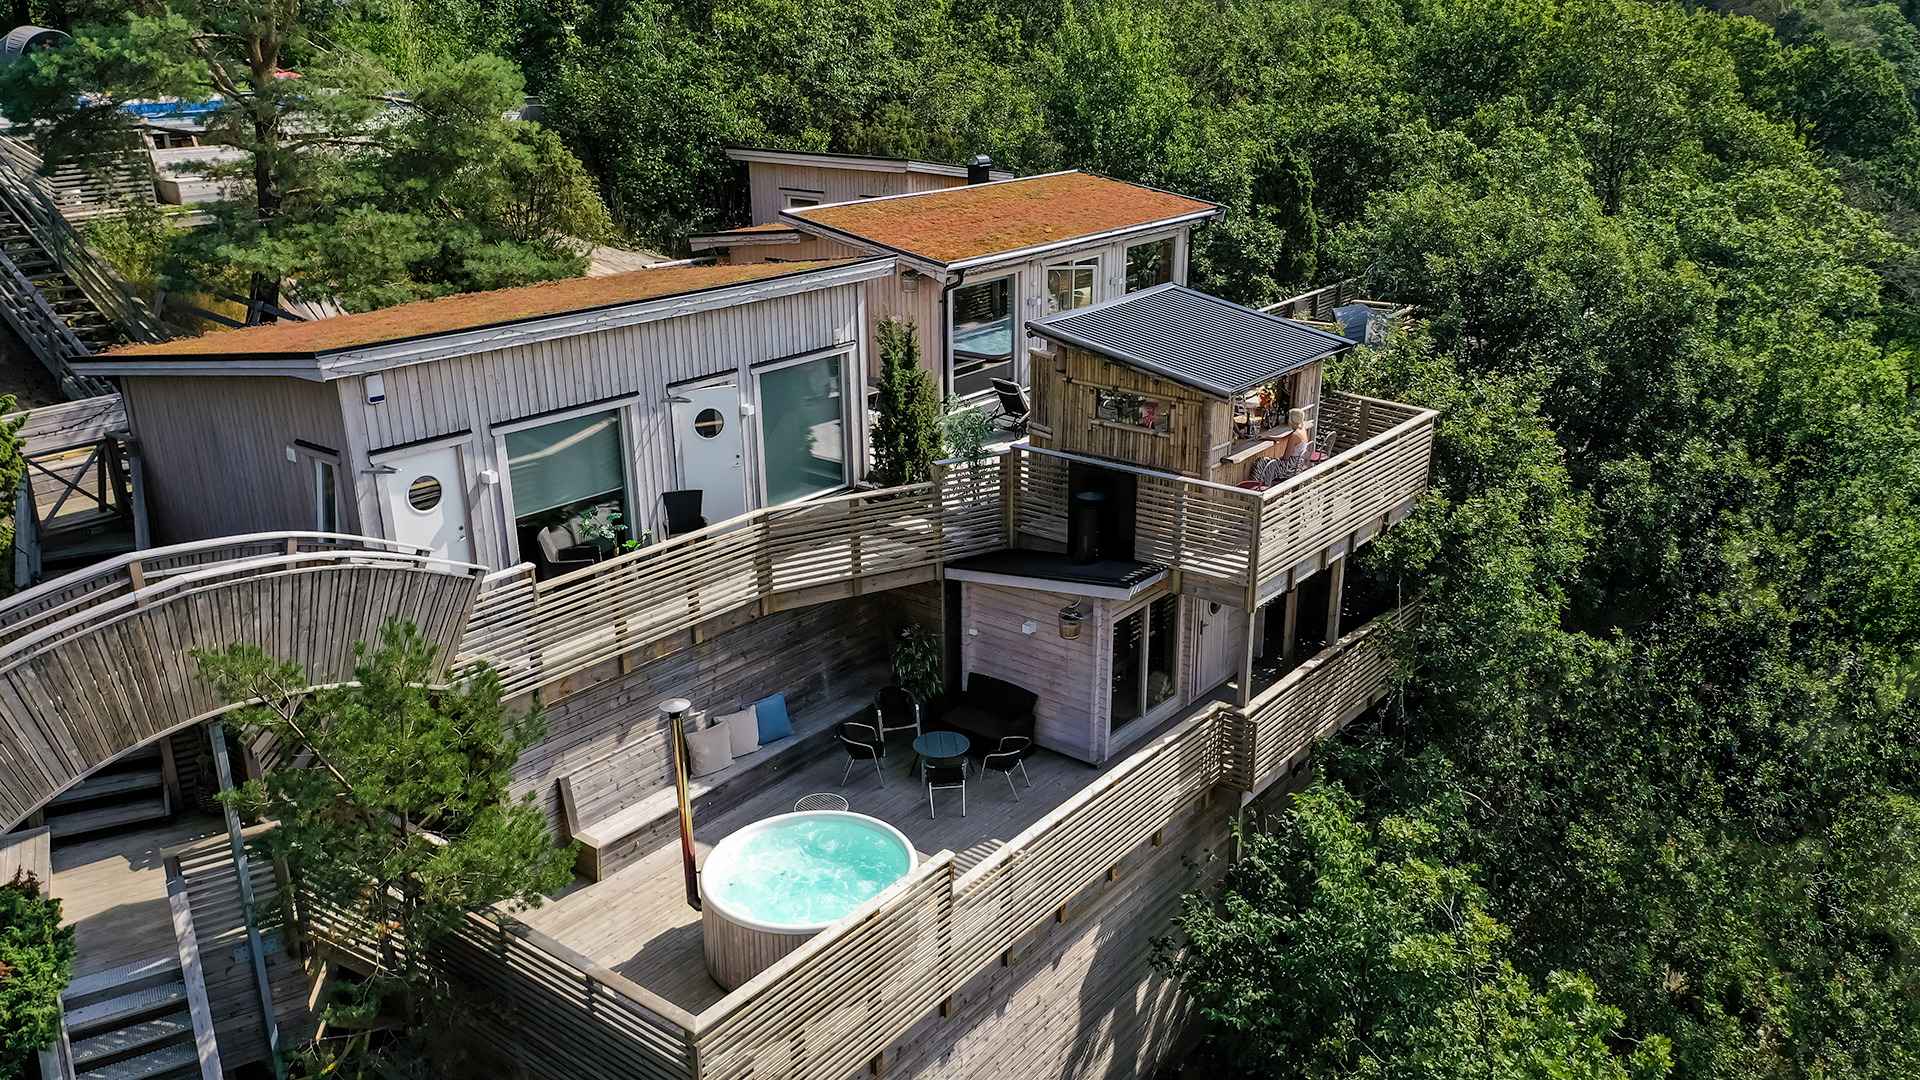 An overview of the Treetop Spas wooden buildings among the tree tops.